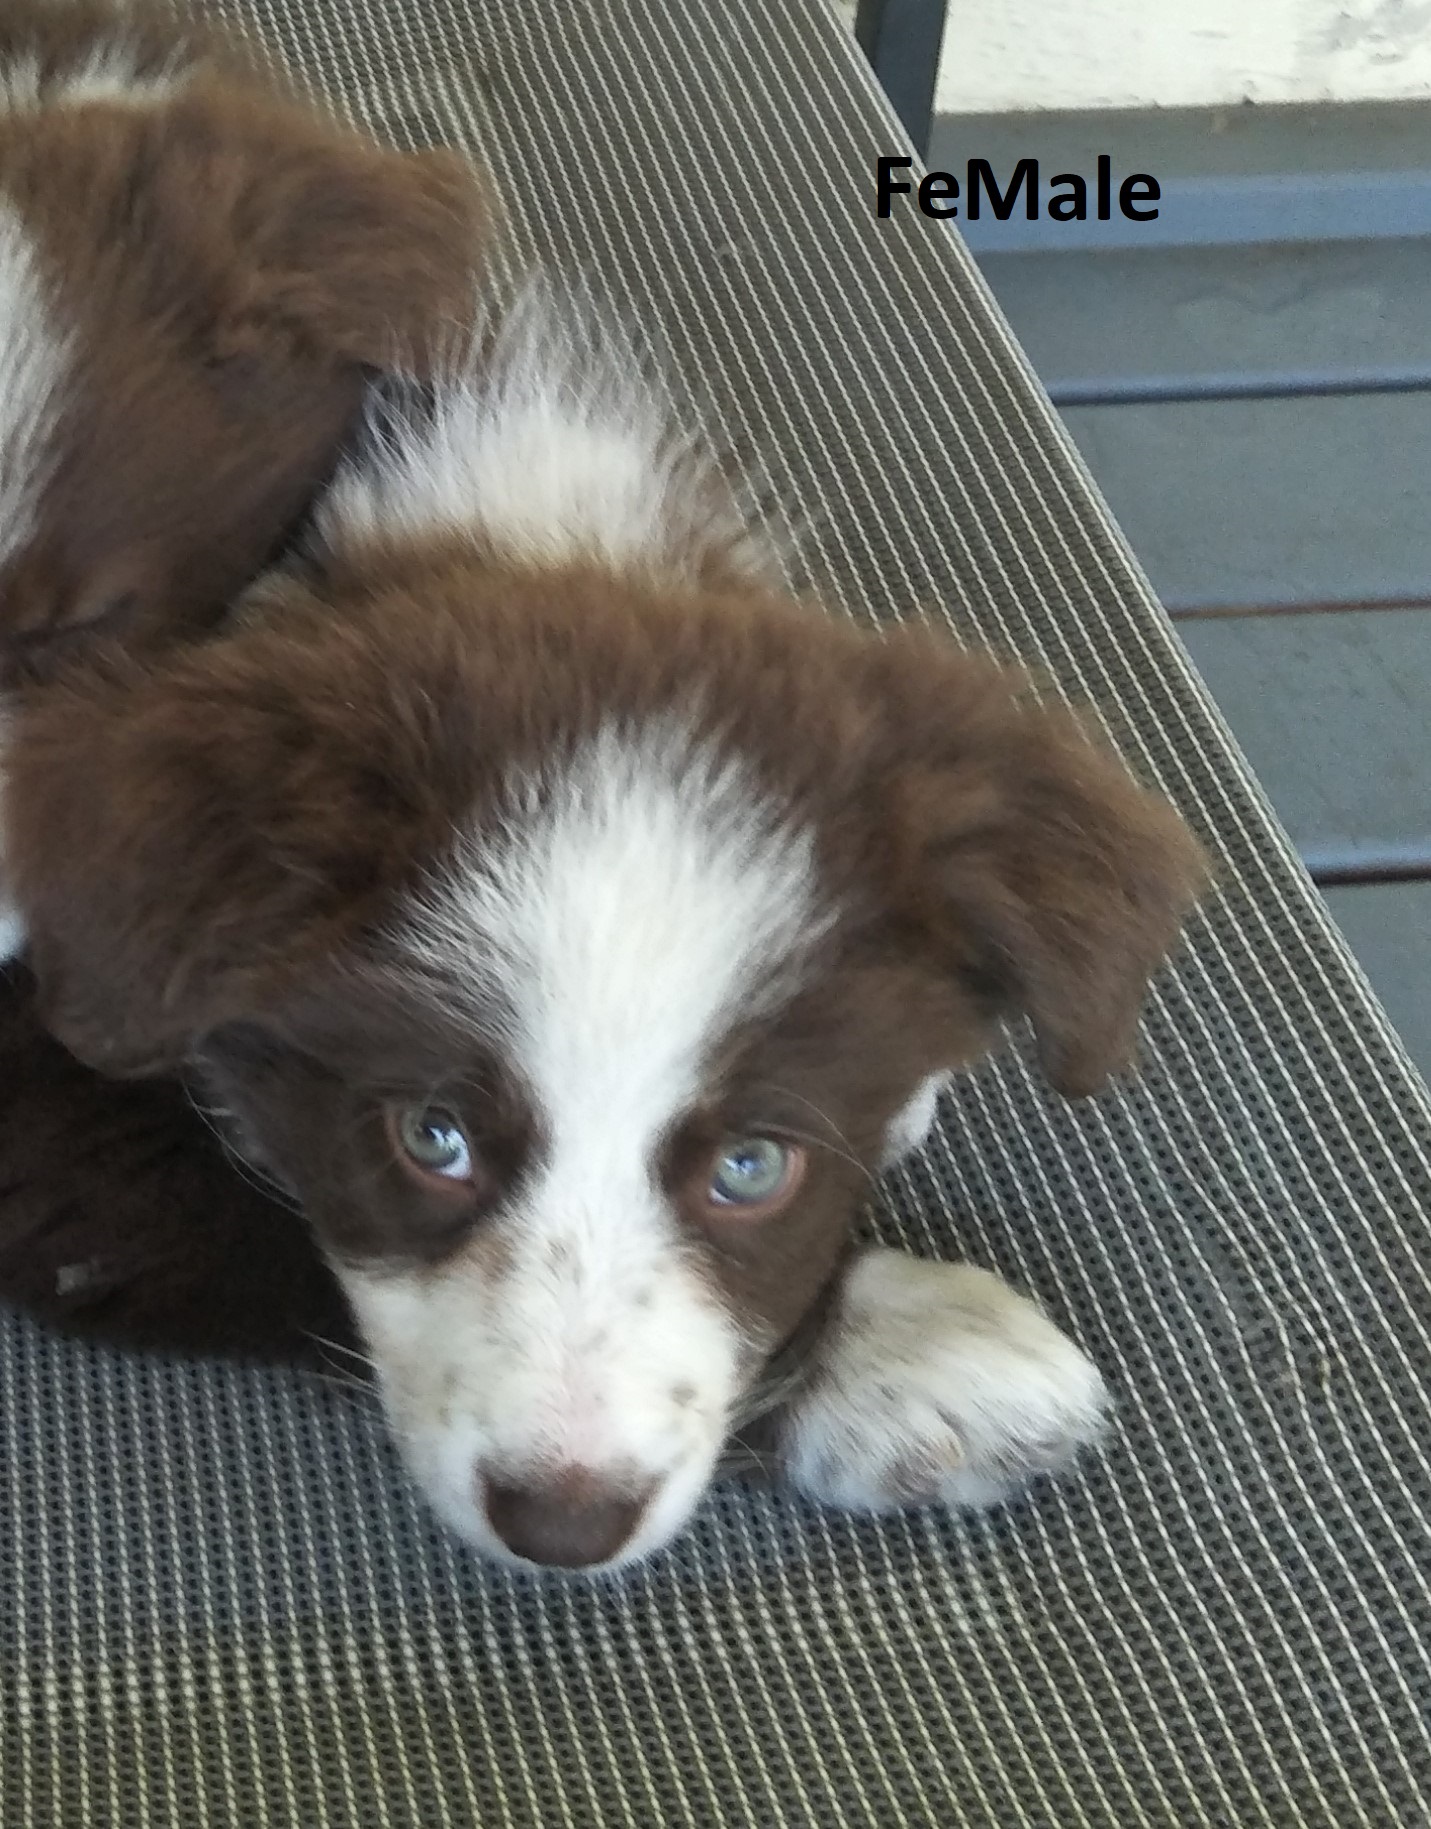 Pure Bred Chocolate Border Collie Puppies